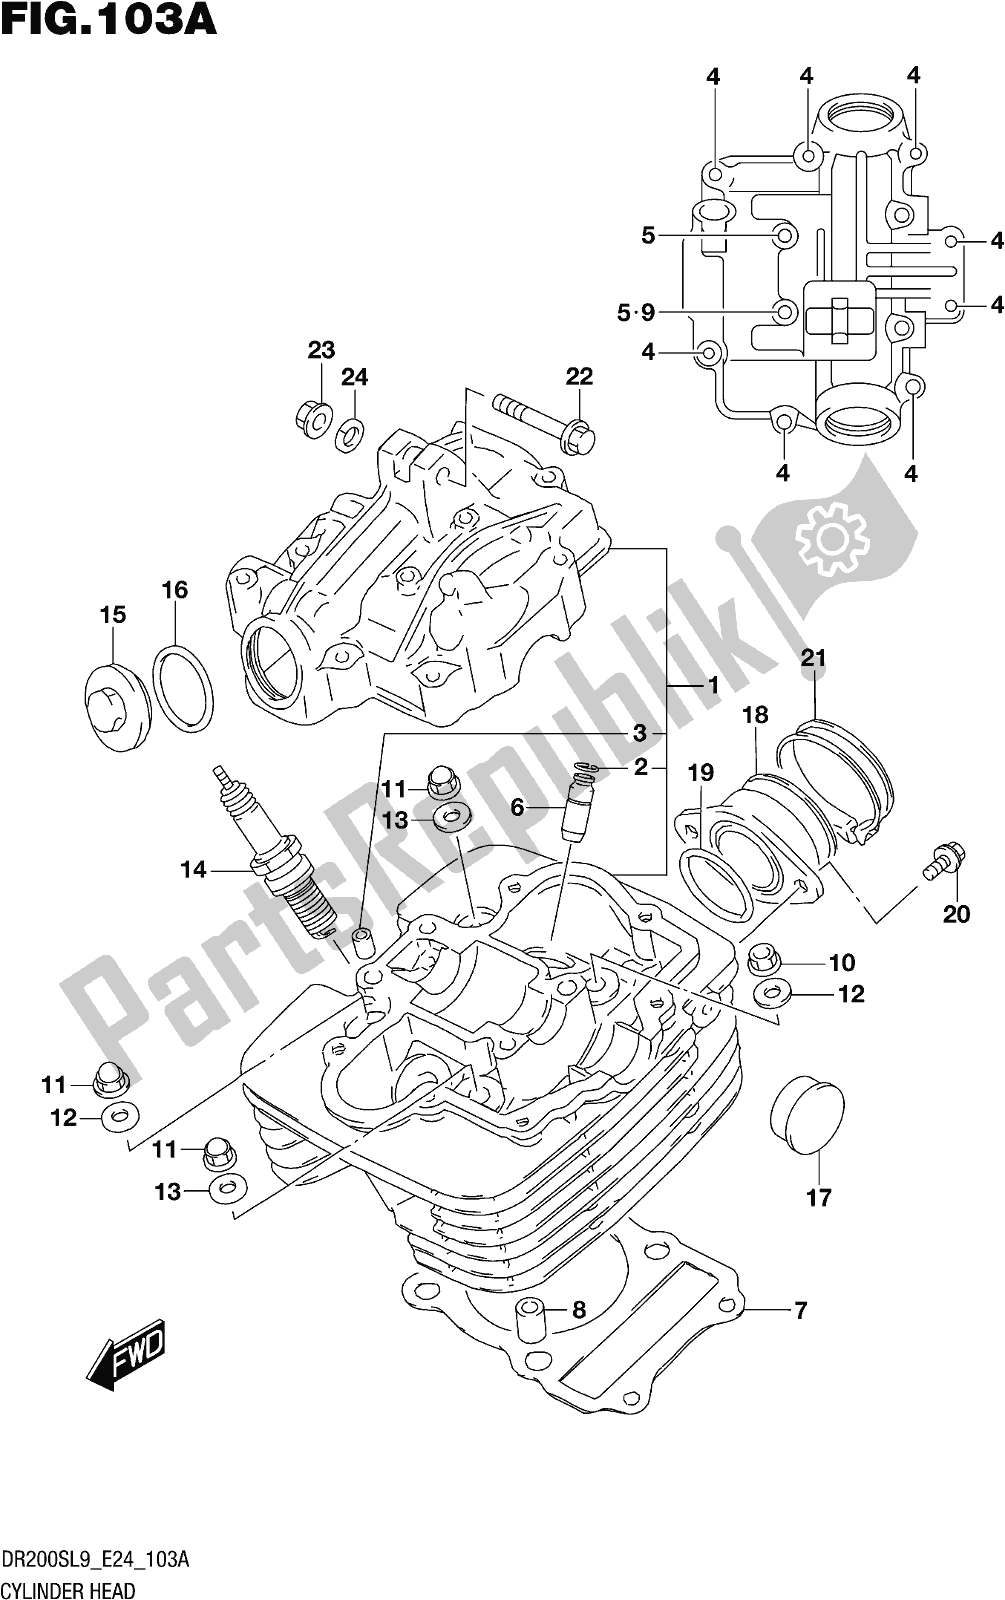 All parts for the Fig. 103a Cylinder Head of the Suzuki DR 200S 2019